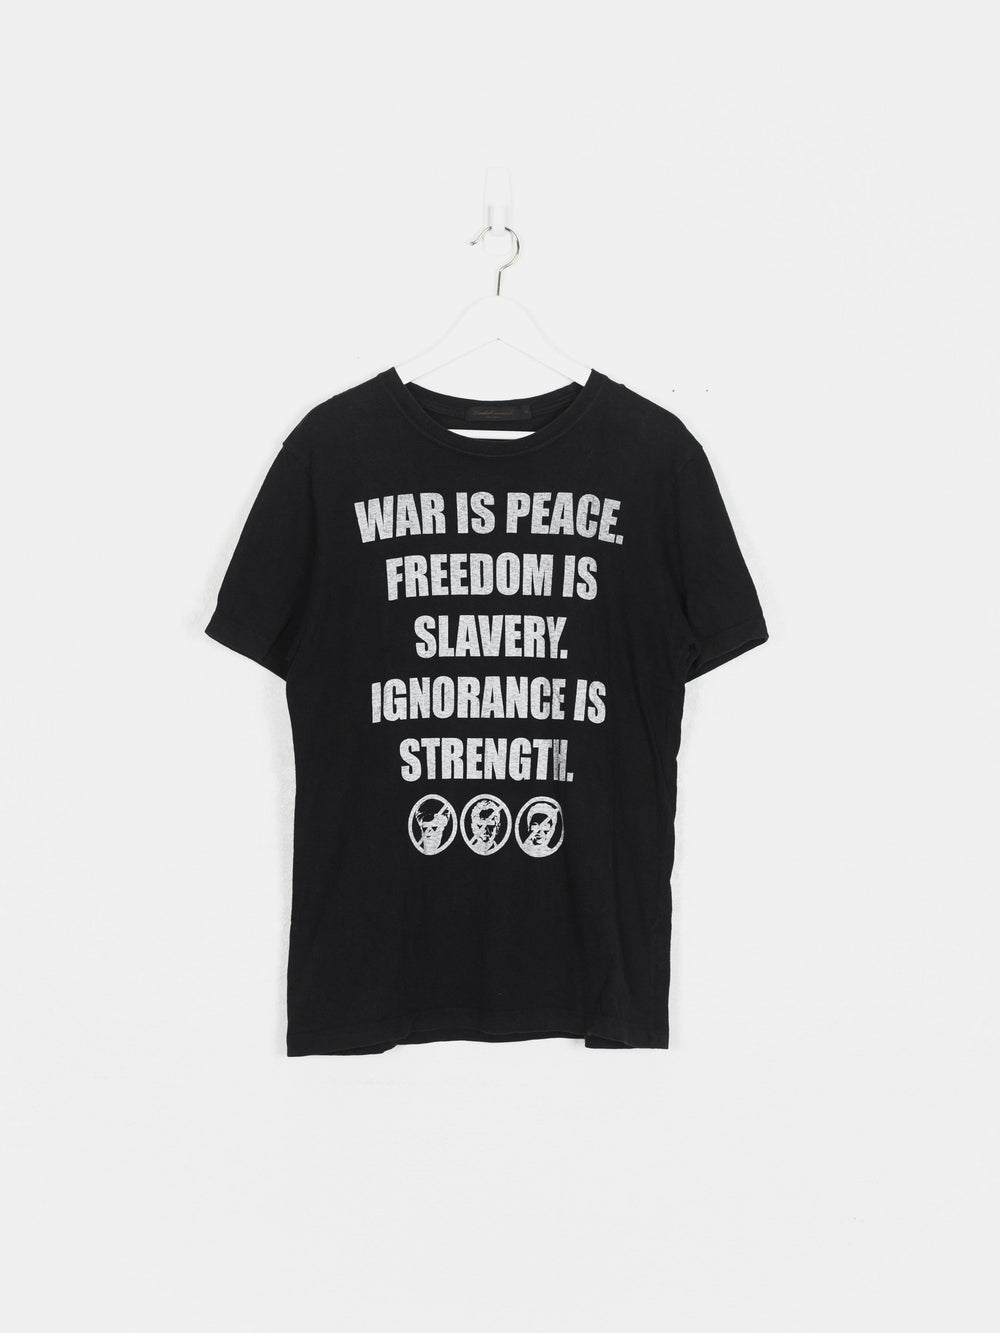 Undercover 1984 War is Peace Tee